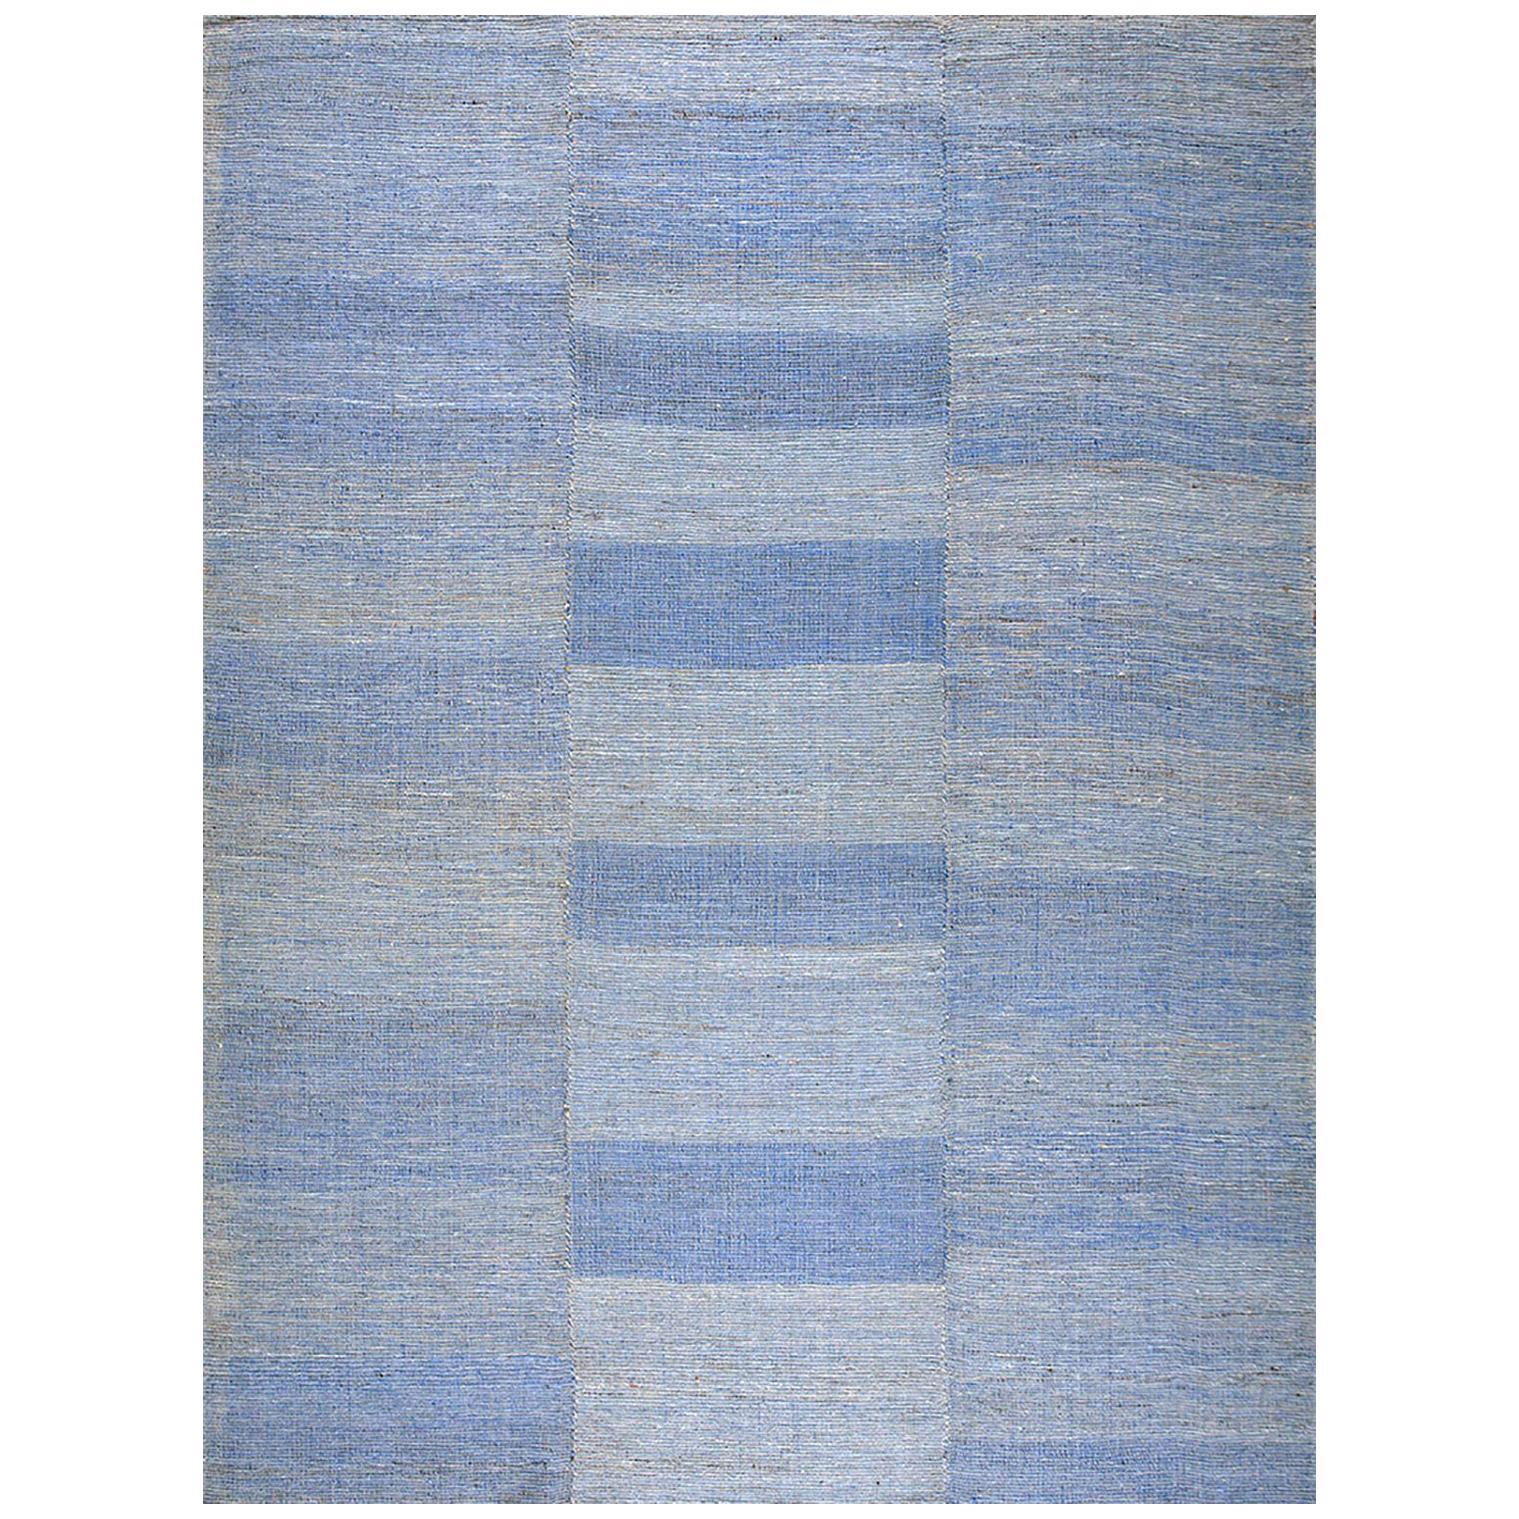 Contemporary Handwoven Wool Shaker Style Flat Weave ( 9'1" x 12'2" -277 x 371 ) For Sale